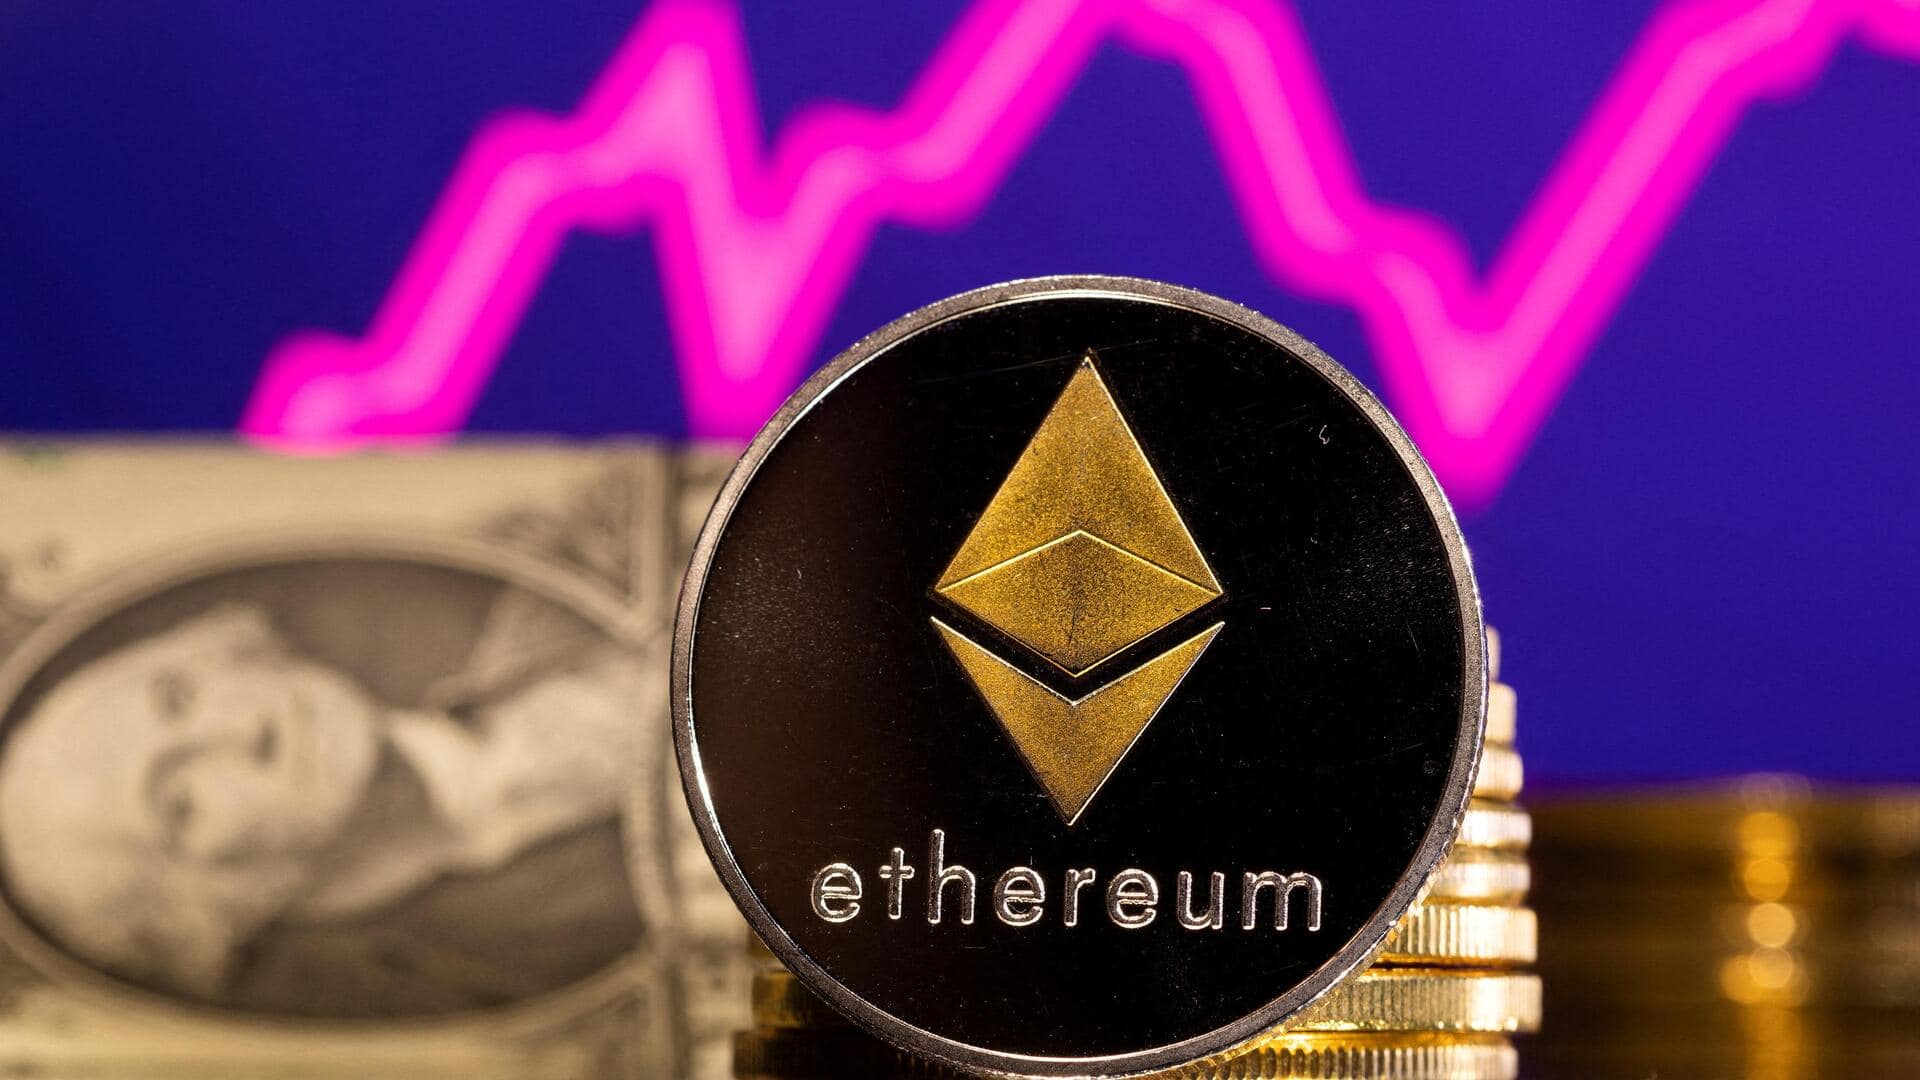 Cryptocurrency prices today: Check rates of Bitcoin, Ethereum, Dogecoin, Tether